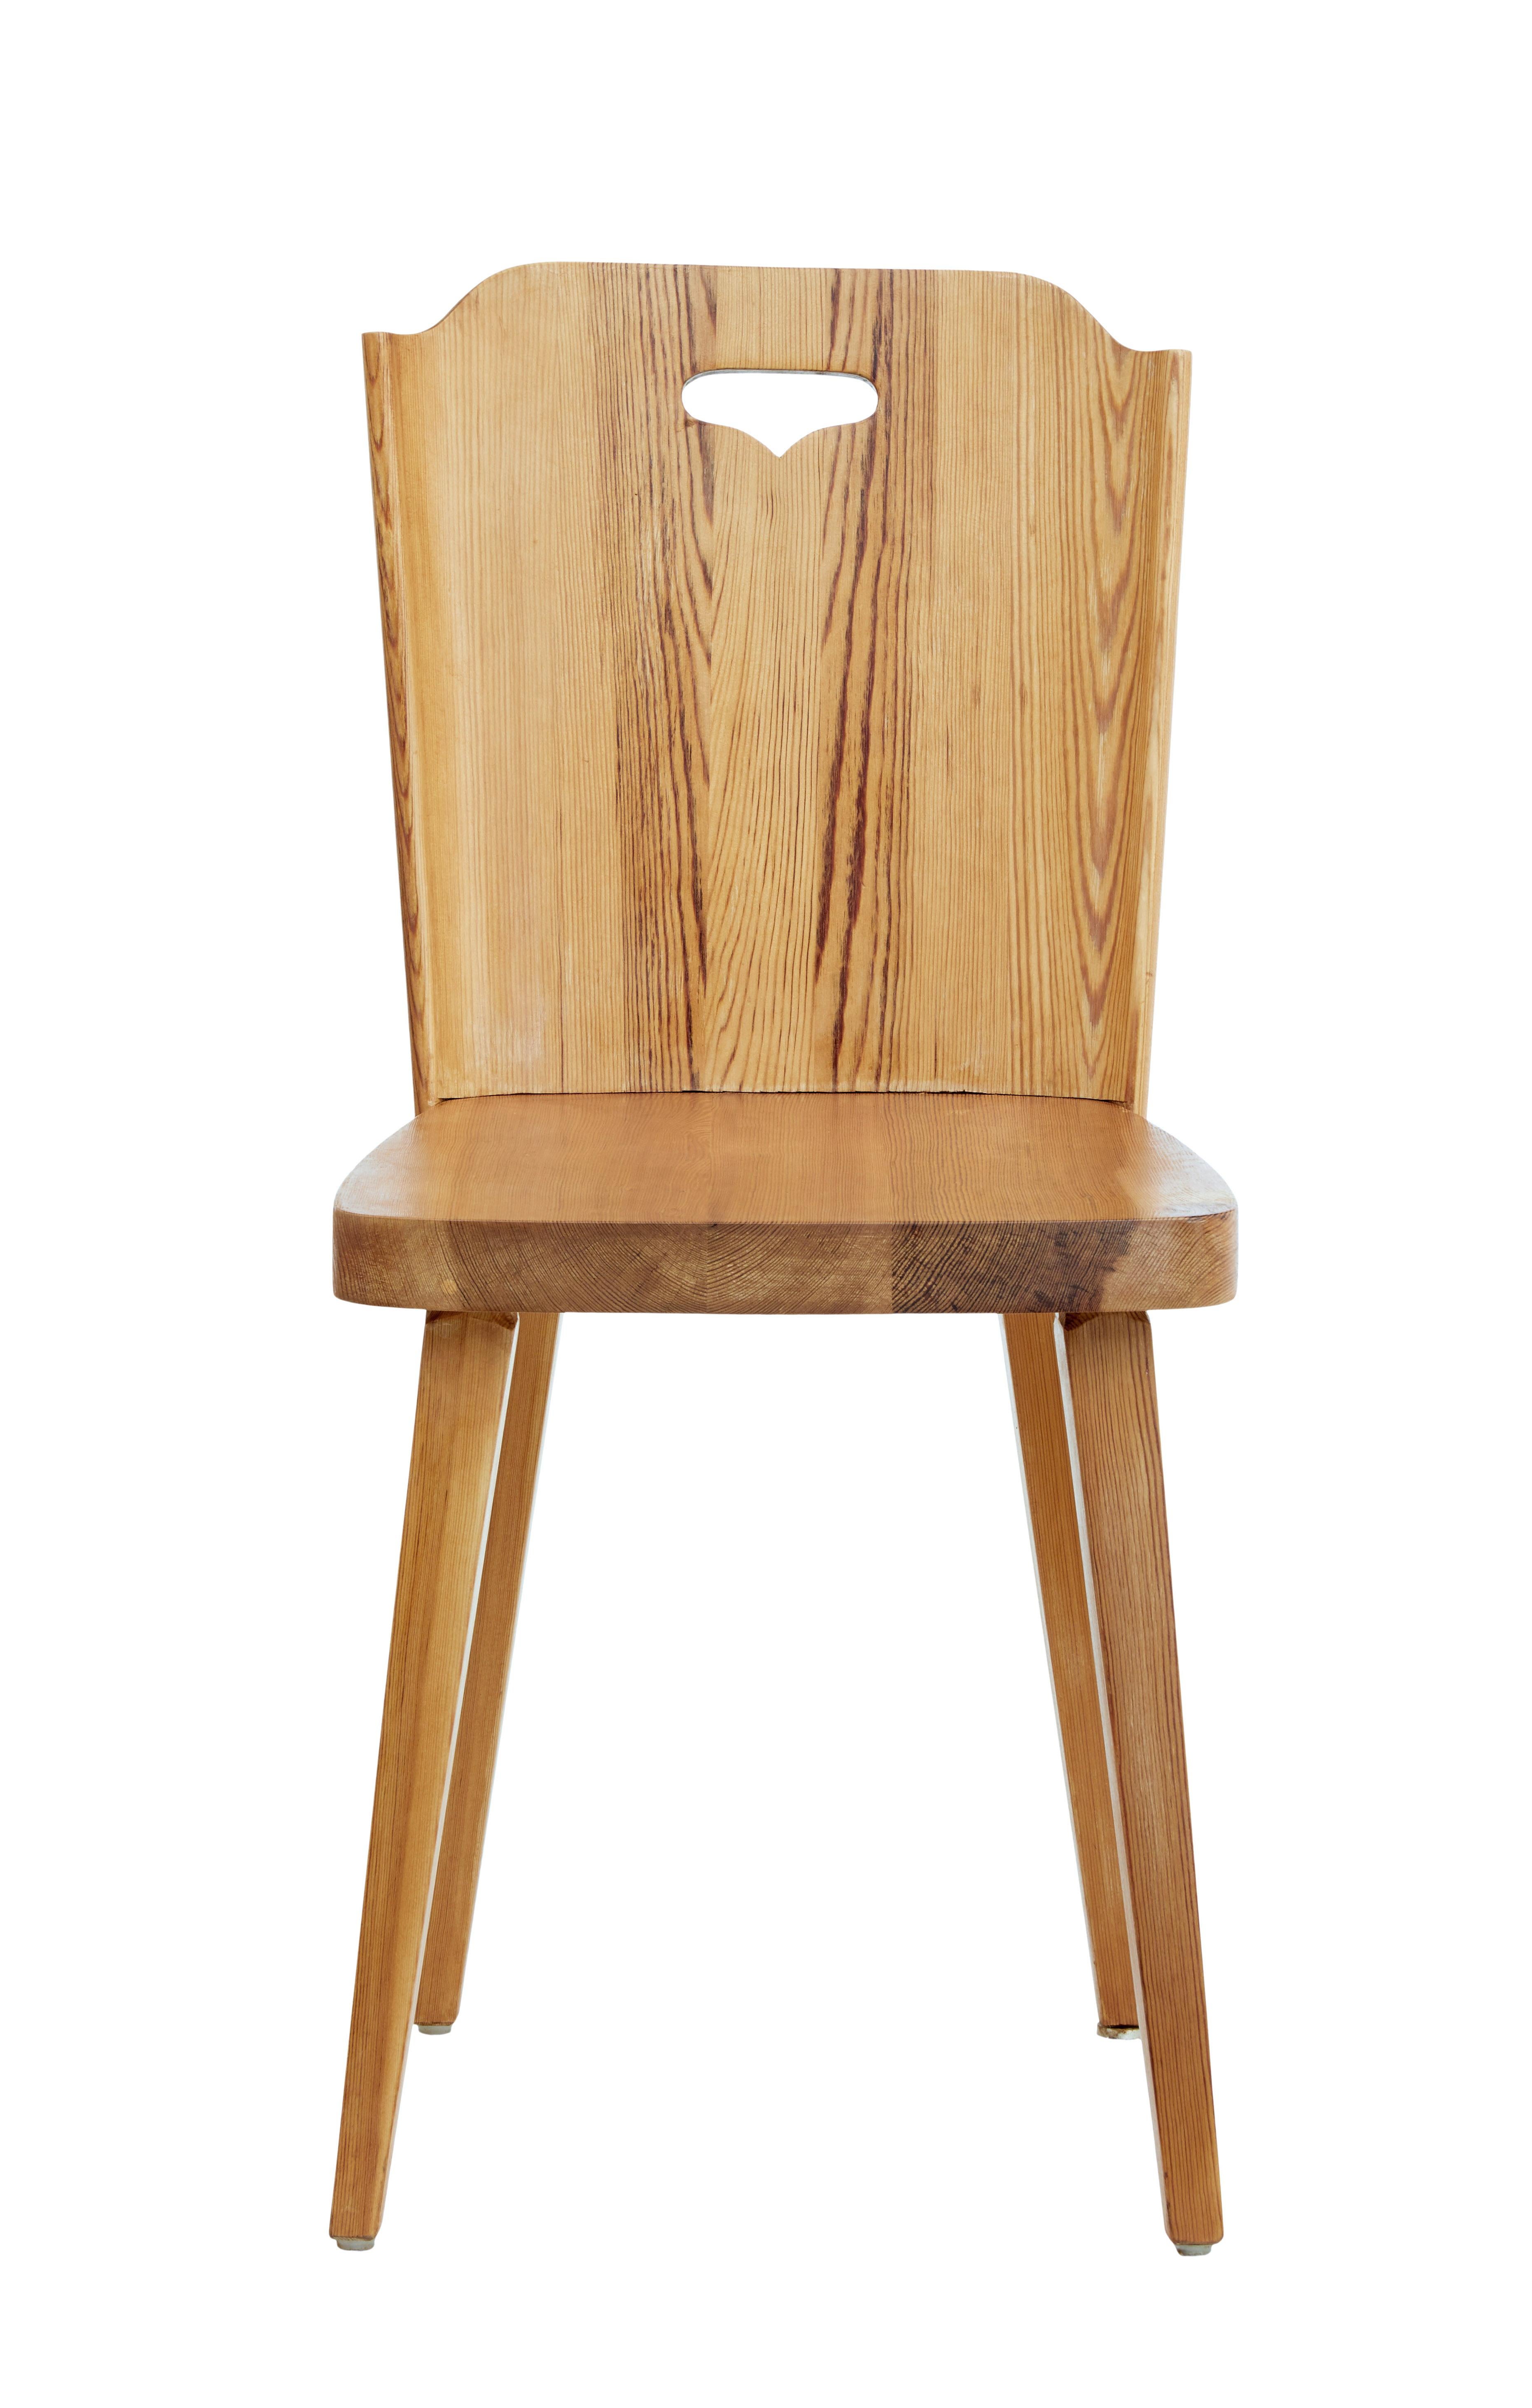 Set of 6 1960s Swedish pine dining chairs, circa 1960.

Fine example of Scandinavian modern design furniture. Shaped backs with cut out carrying handle. Design feature with the screws overlapping into the seat.

Standing on 4 tapered